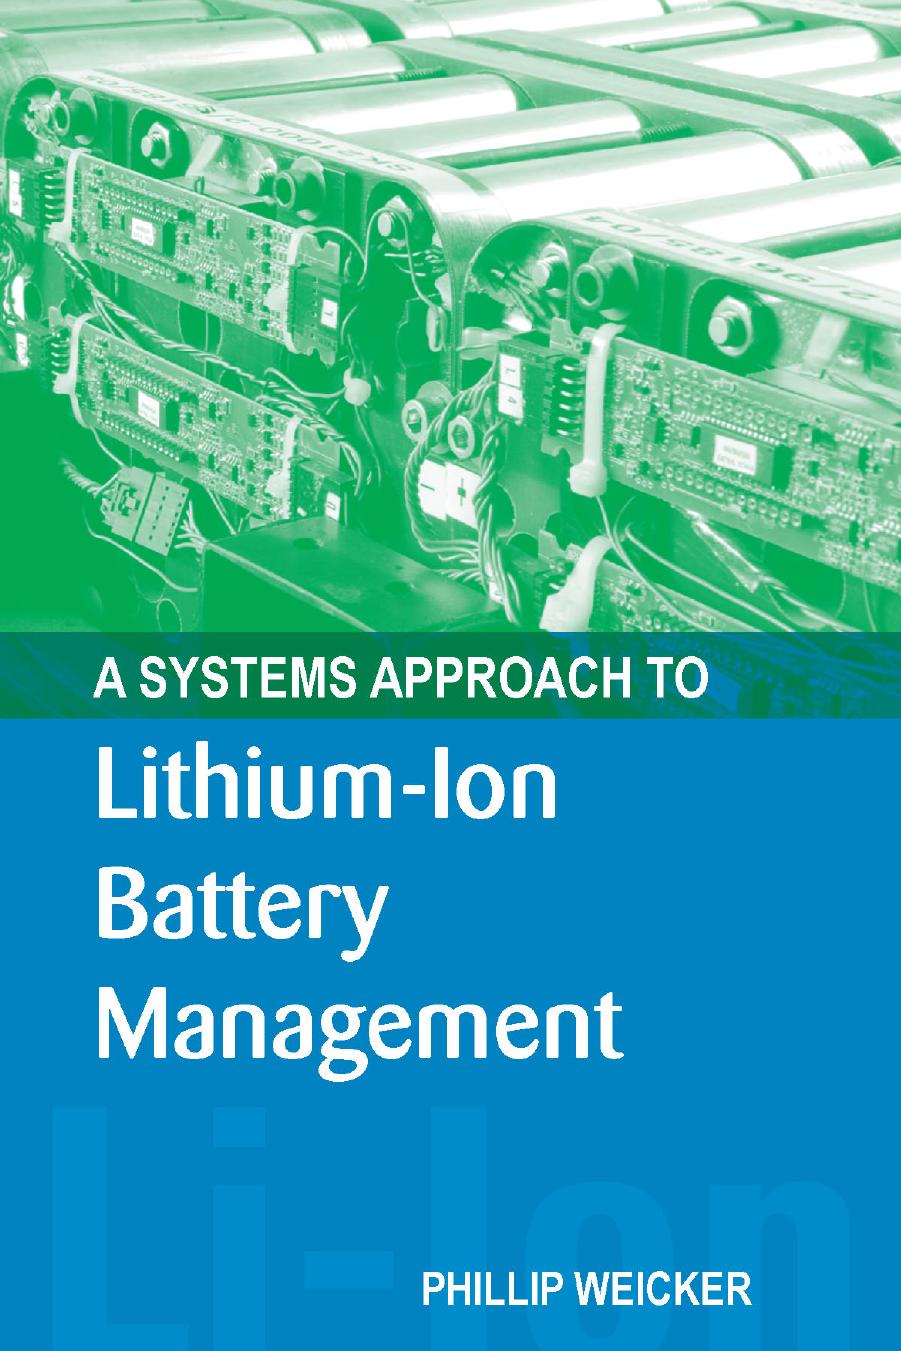 A Systems Approach to Lithium-Ion Battery Management by Weicker